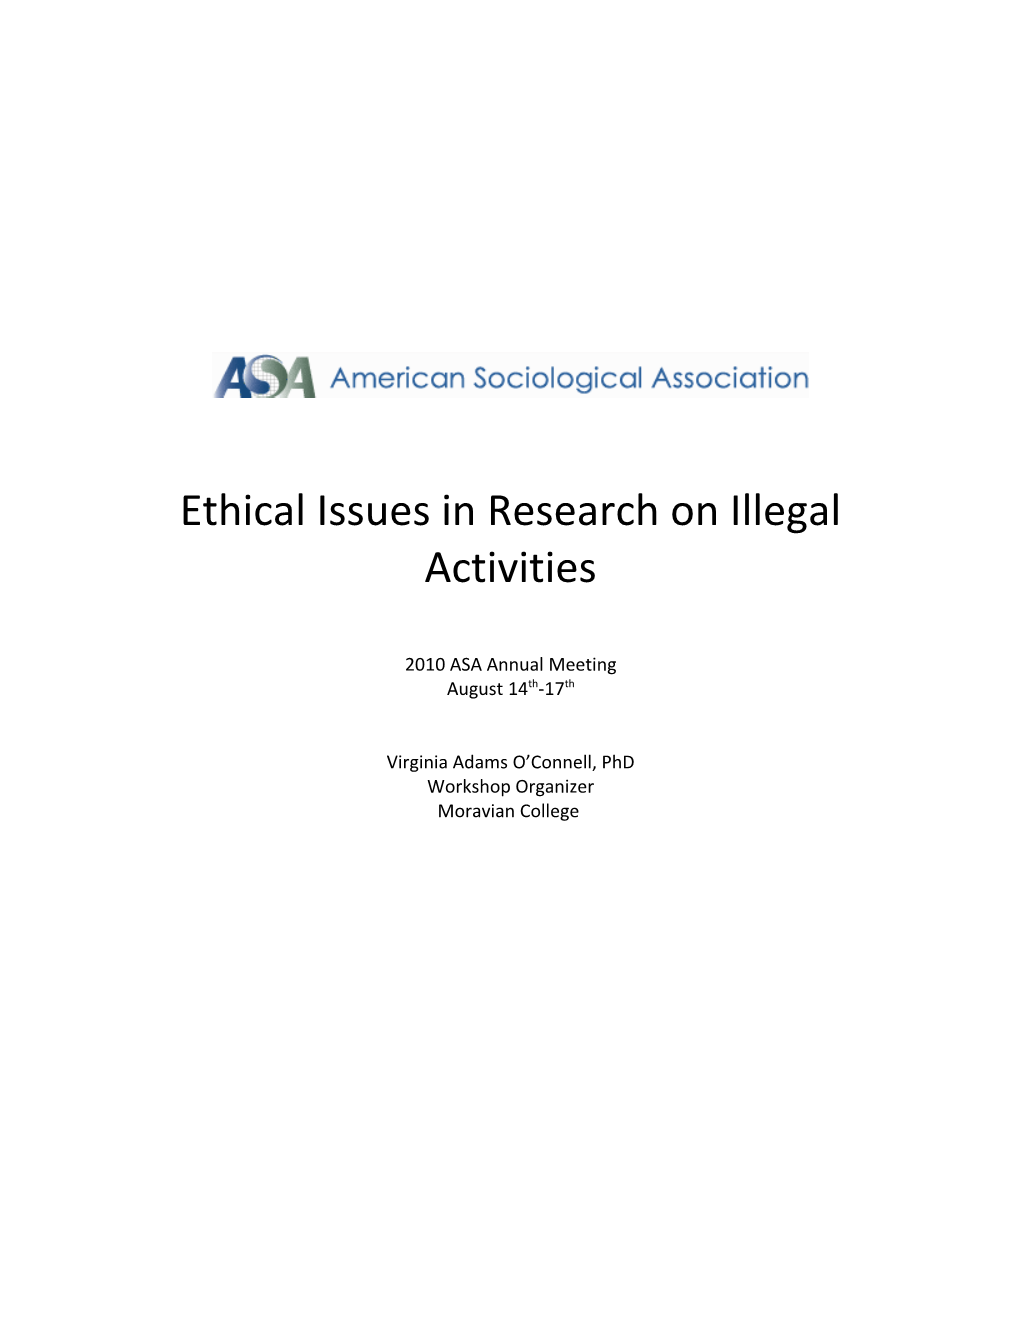 Ethical Issues in Research on Illegal Activities